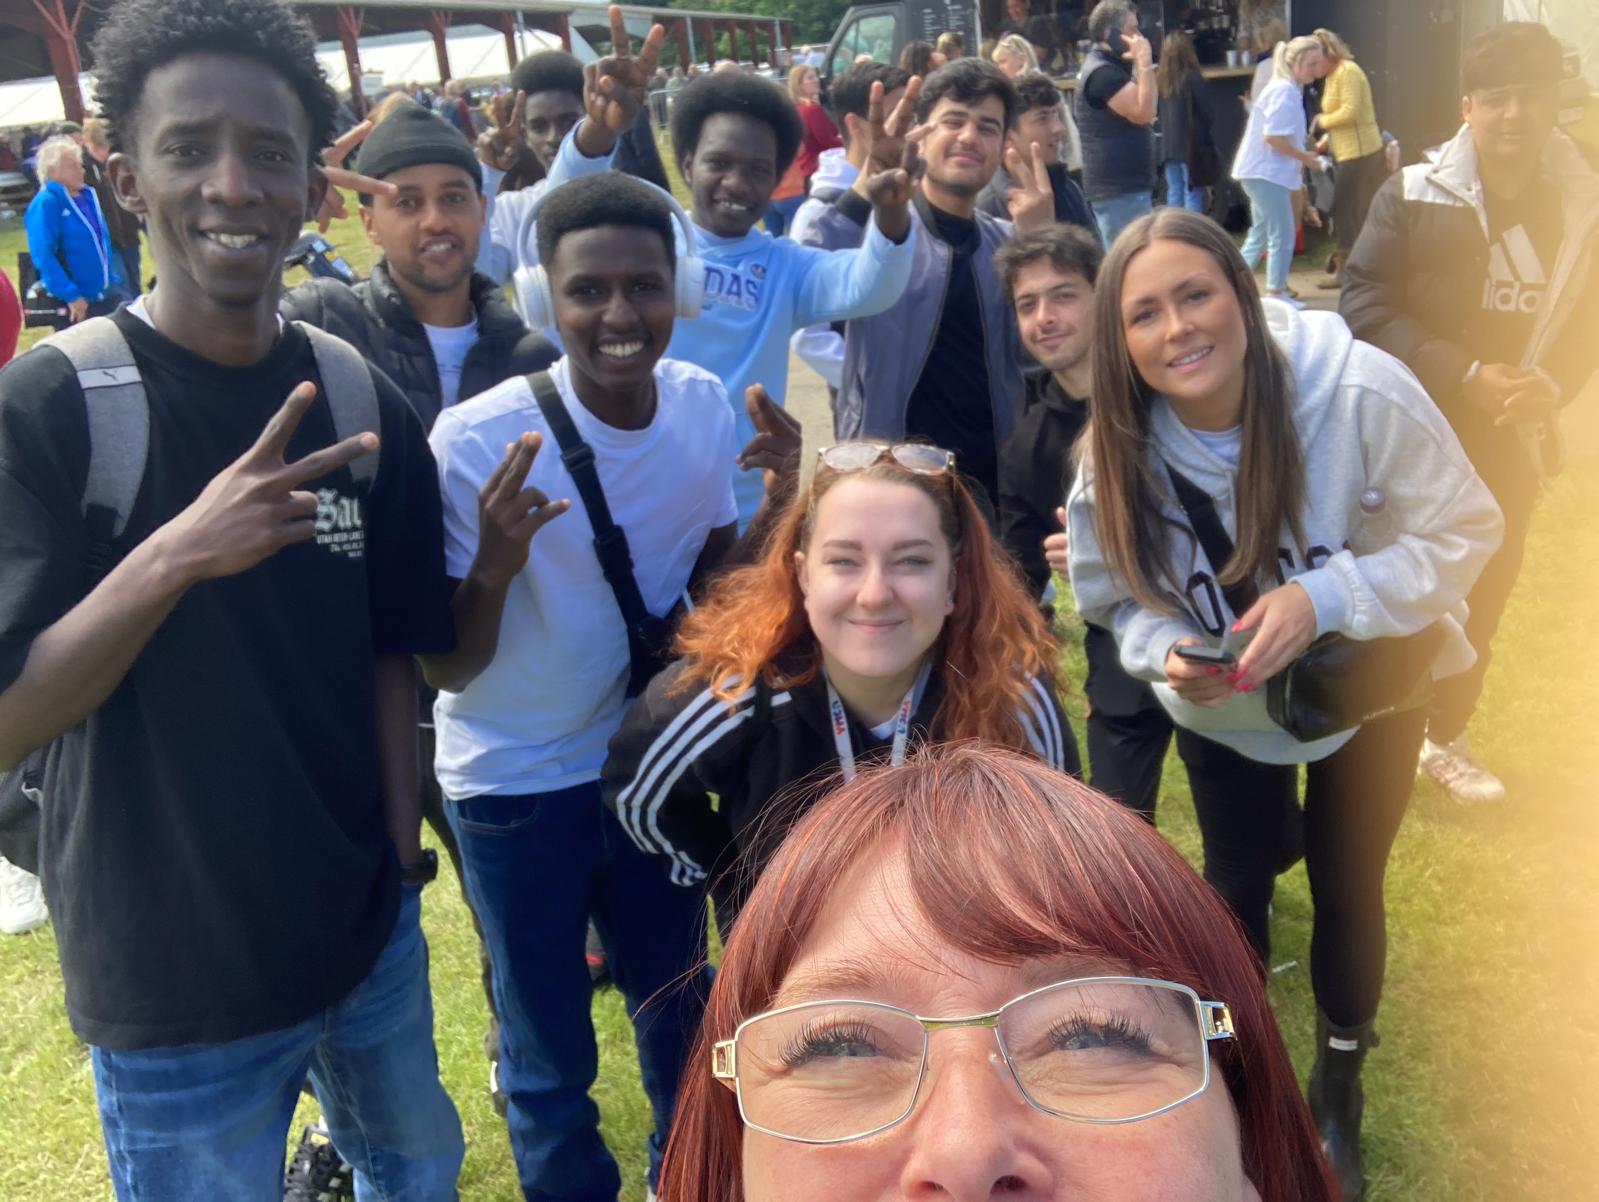 UASC Residents Have a Blast at the Suffolk Show!